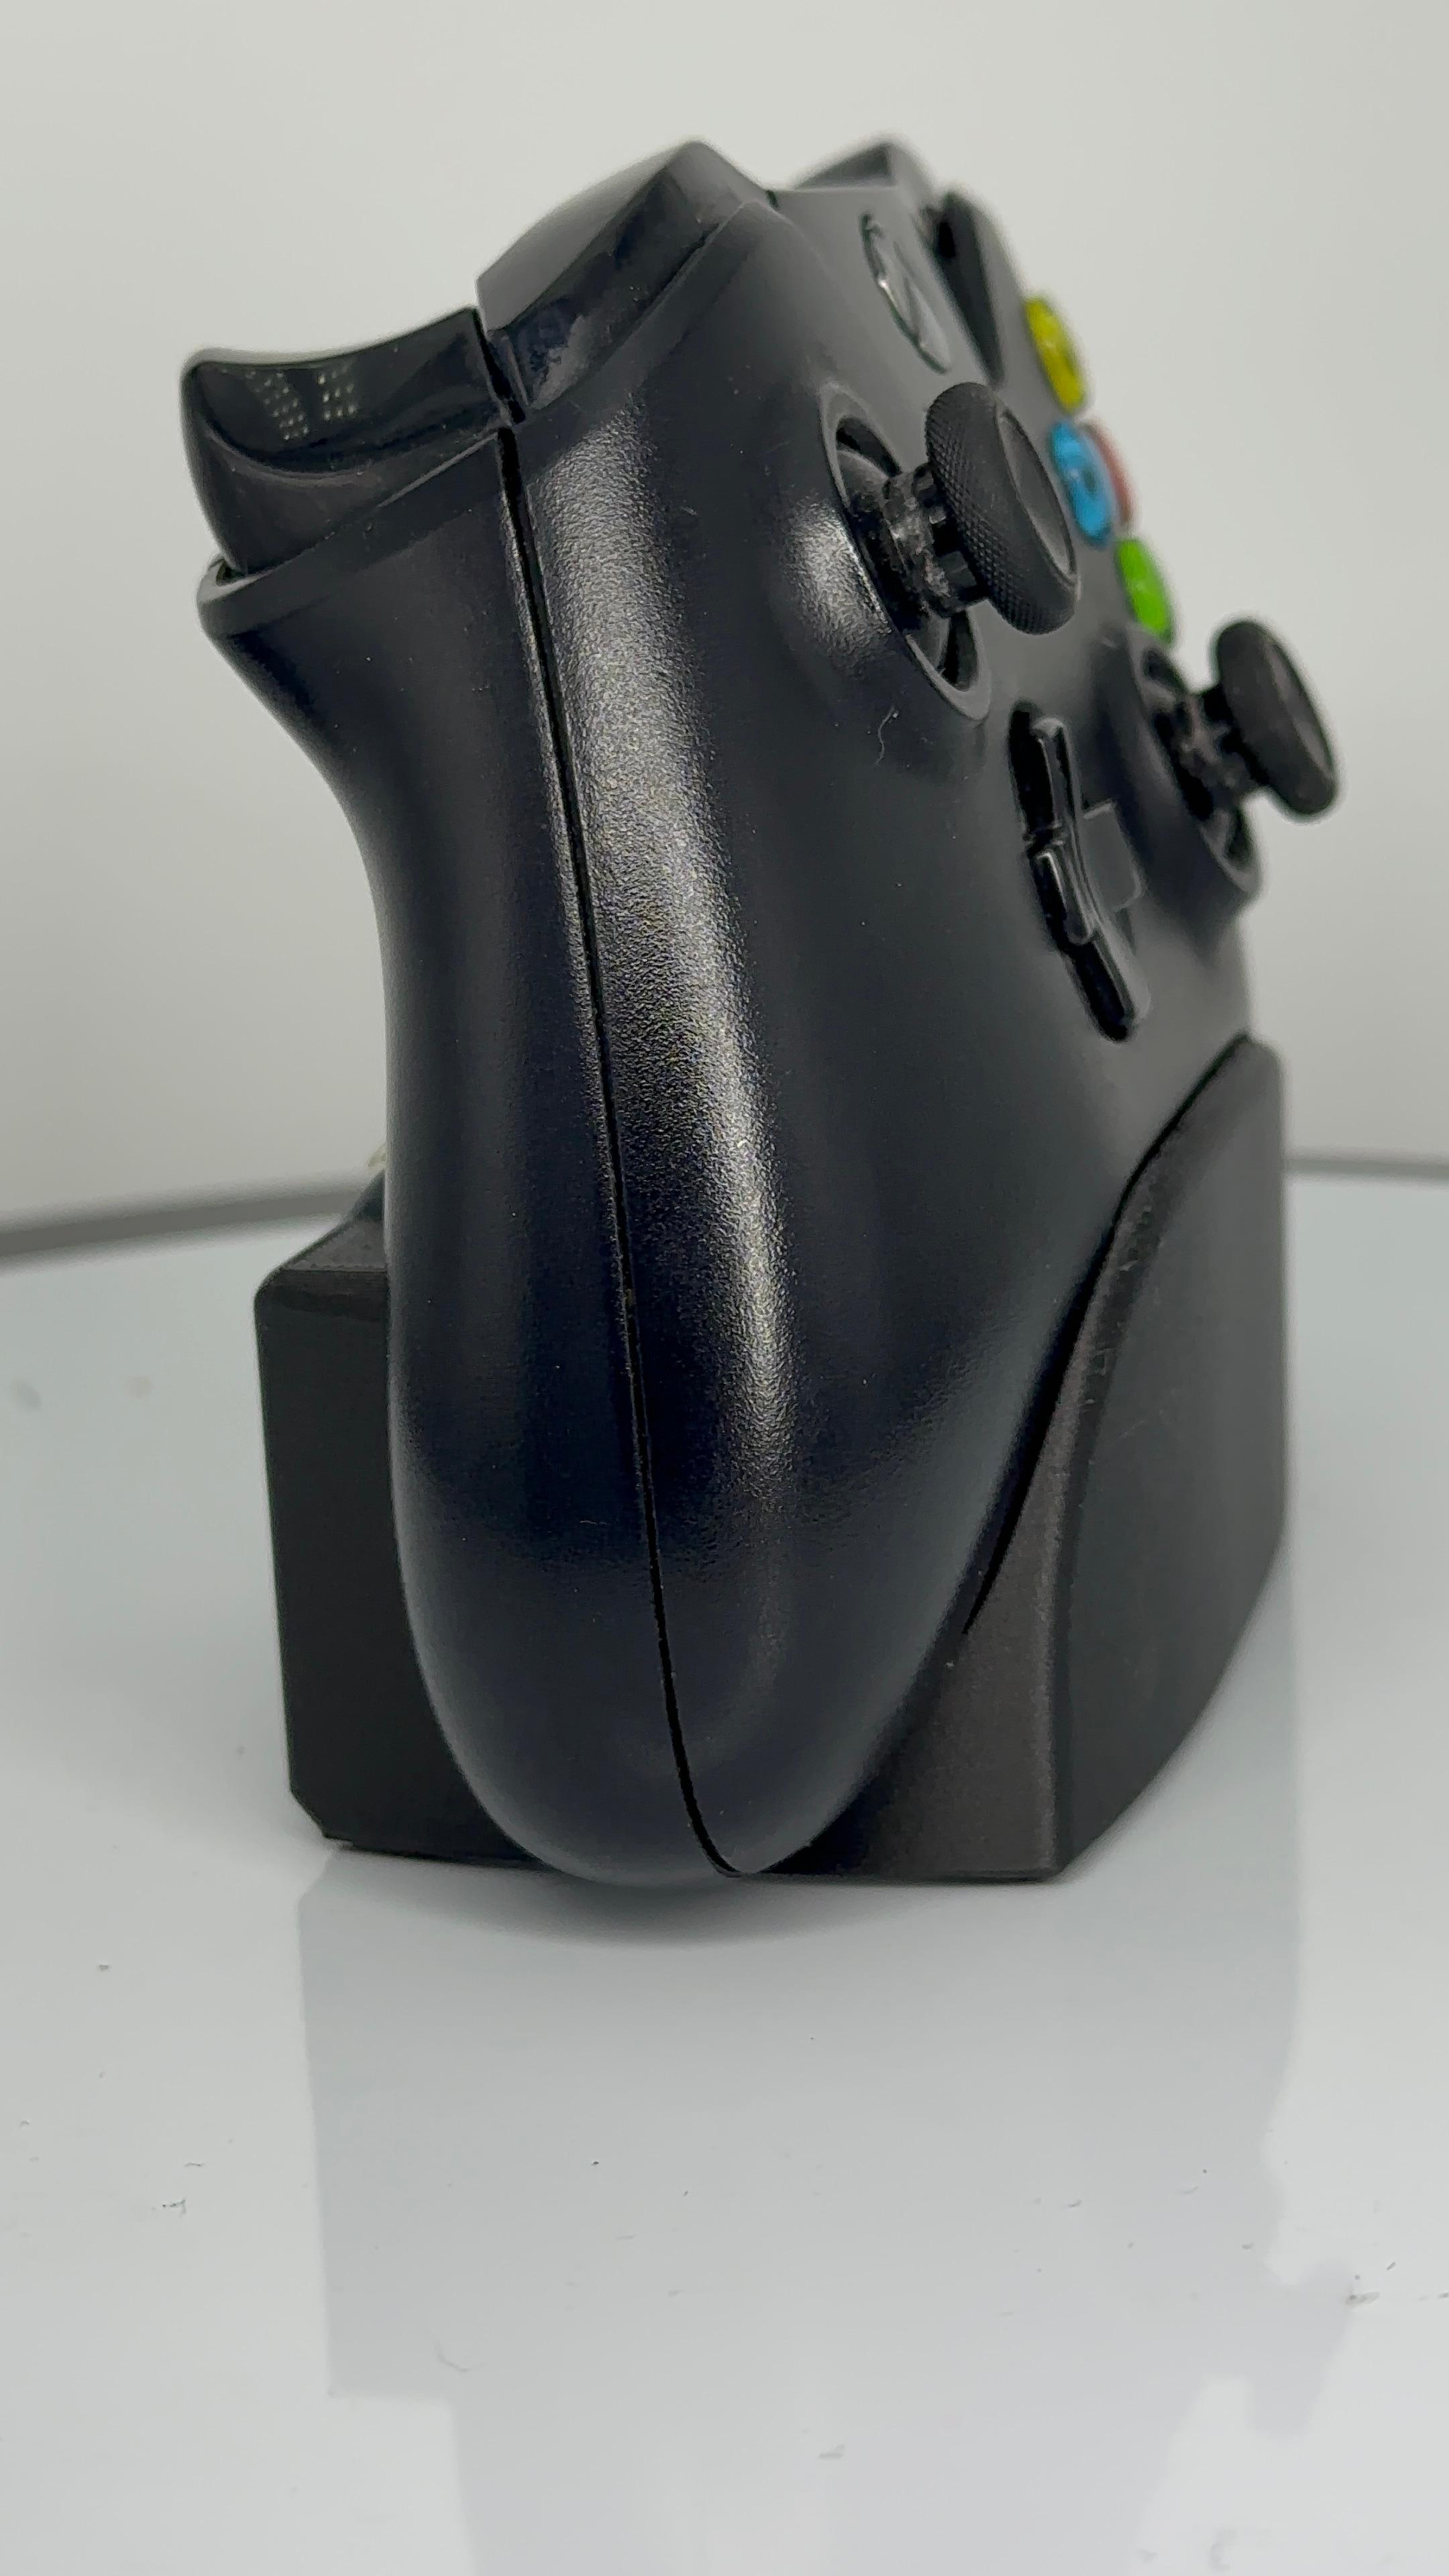 XBOX ANTIGRAVITY BRANDED CONTROLLER STAND 3d model